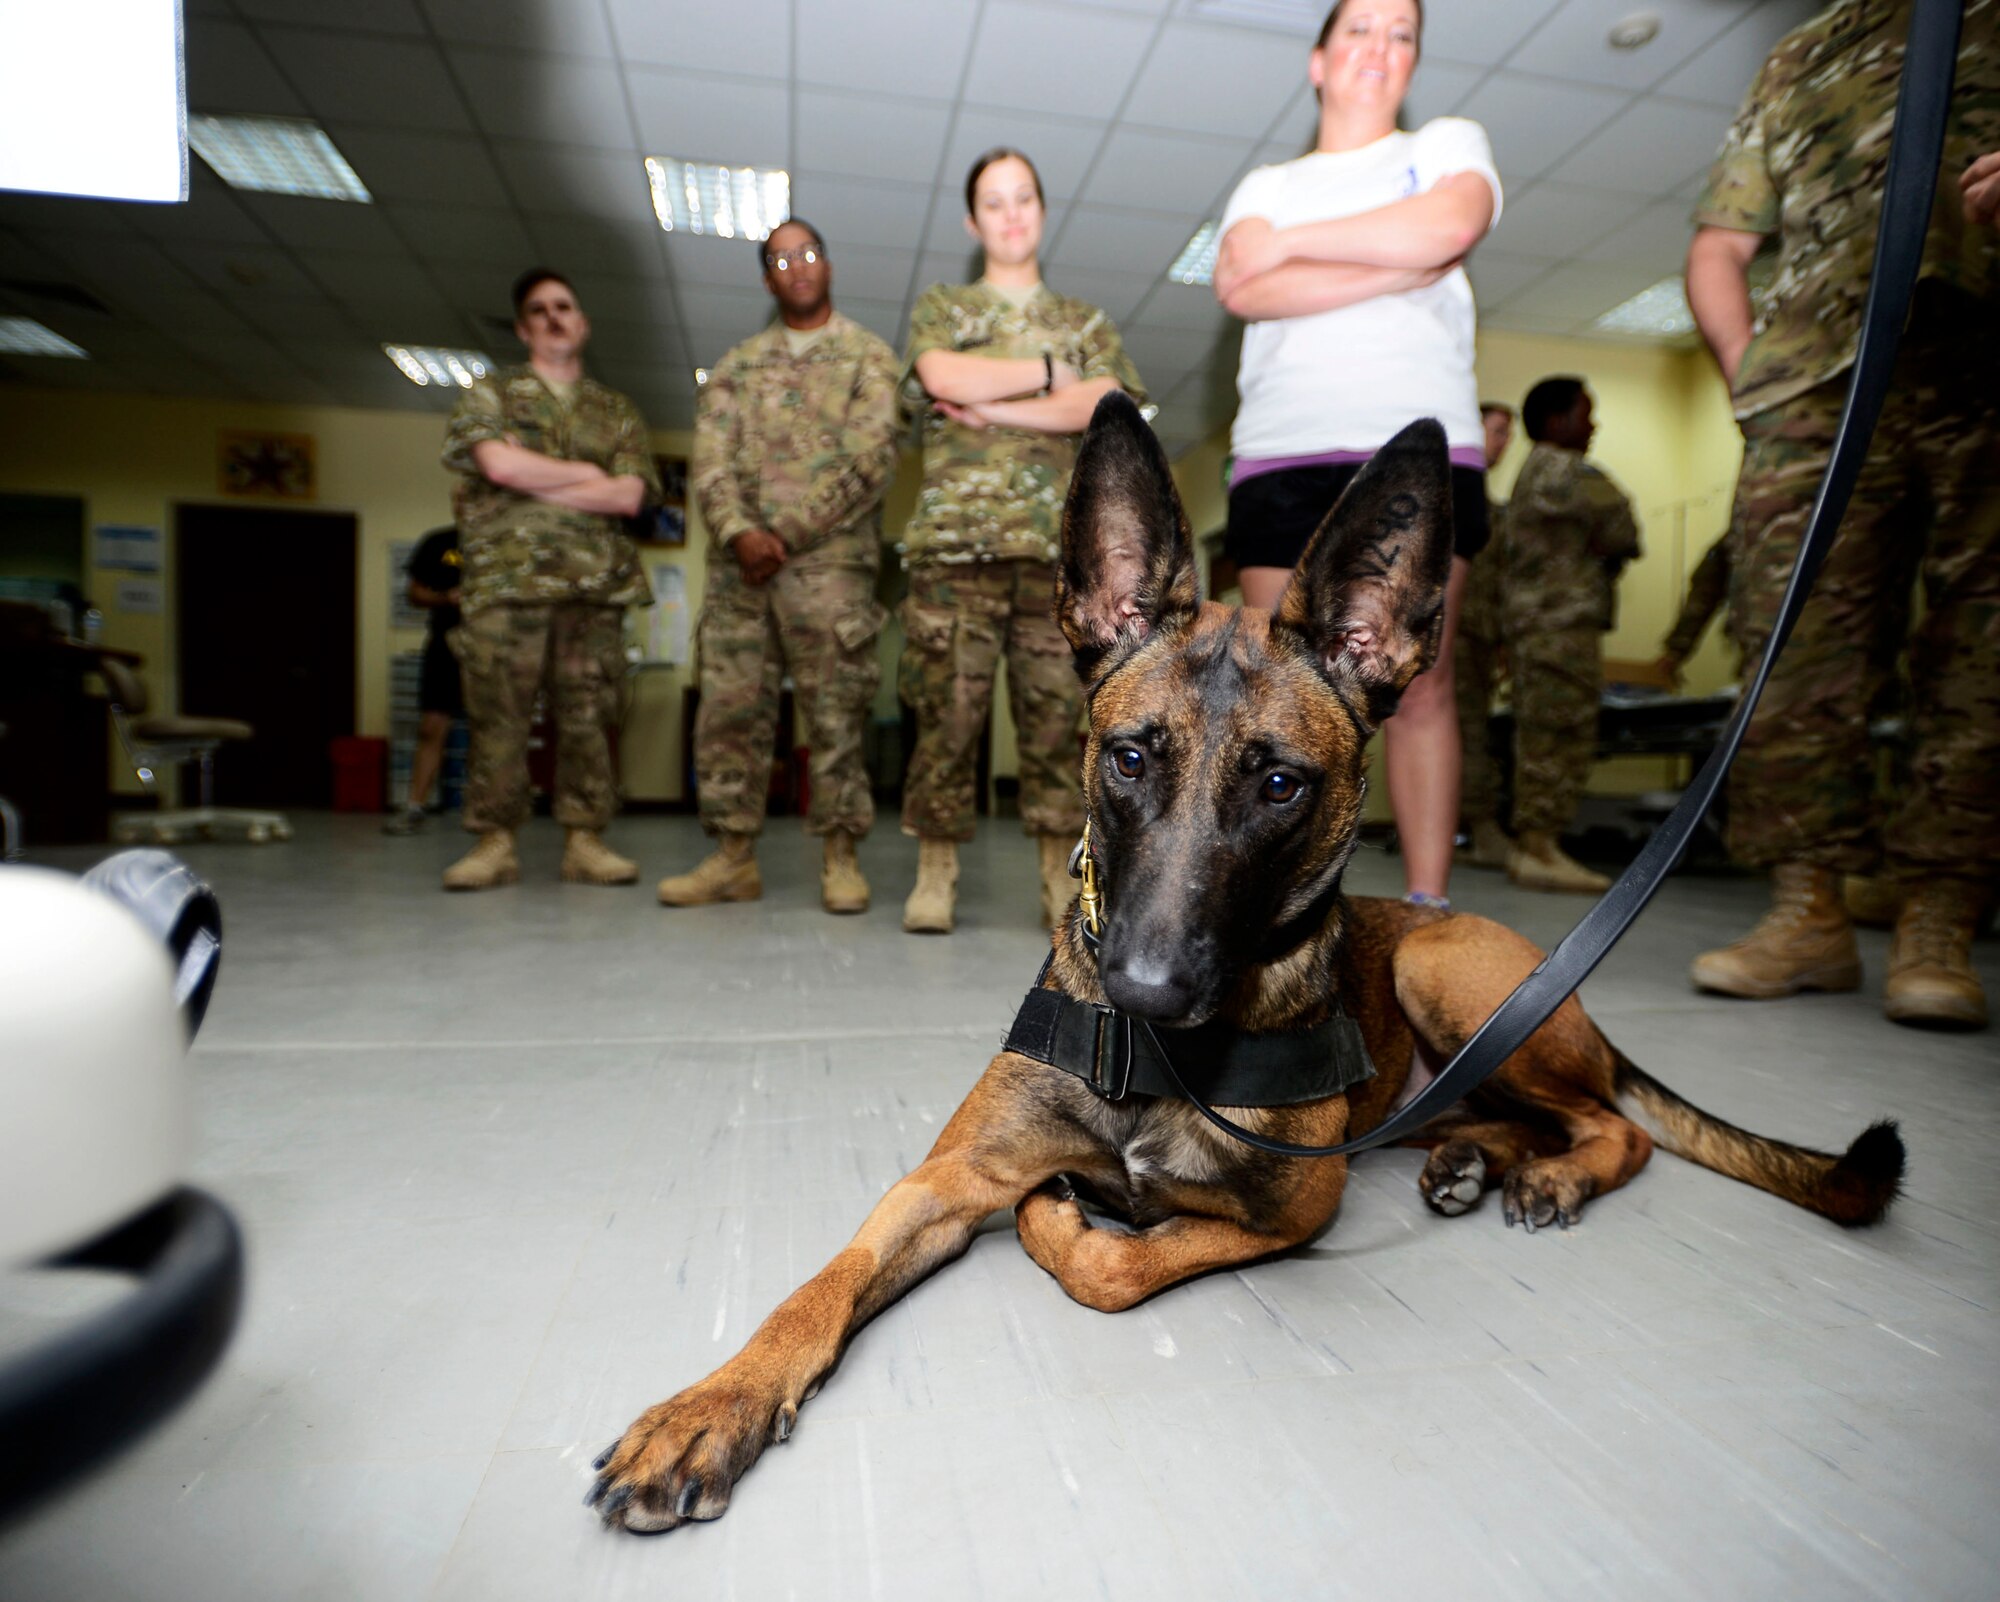 FFrida, U.S. Air Force 386 Expeditionary Security Forces Squadron Military Working Dog, attends medical emergency training at an undisclosed location in Southwest Asia, Sept. 12, 2015. FFrida and GGreta, another USAF MWD, gave hospital personnel hands-on experience working with animal patients. (U.S. Air Force photo by Senior Airman Racheal E. Watson/Released)